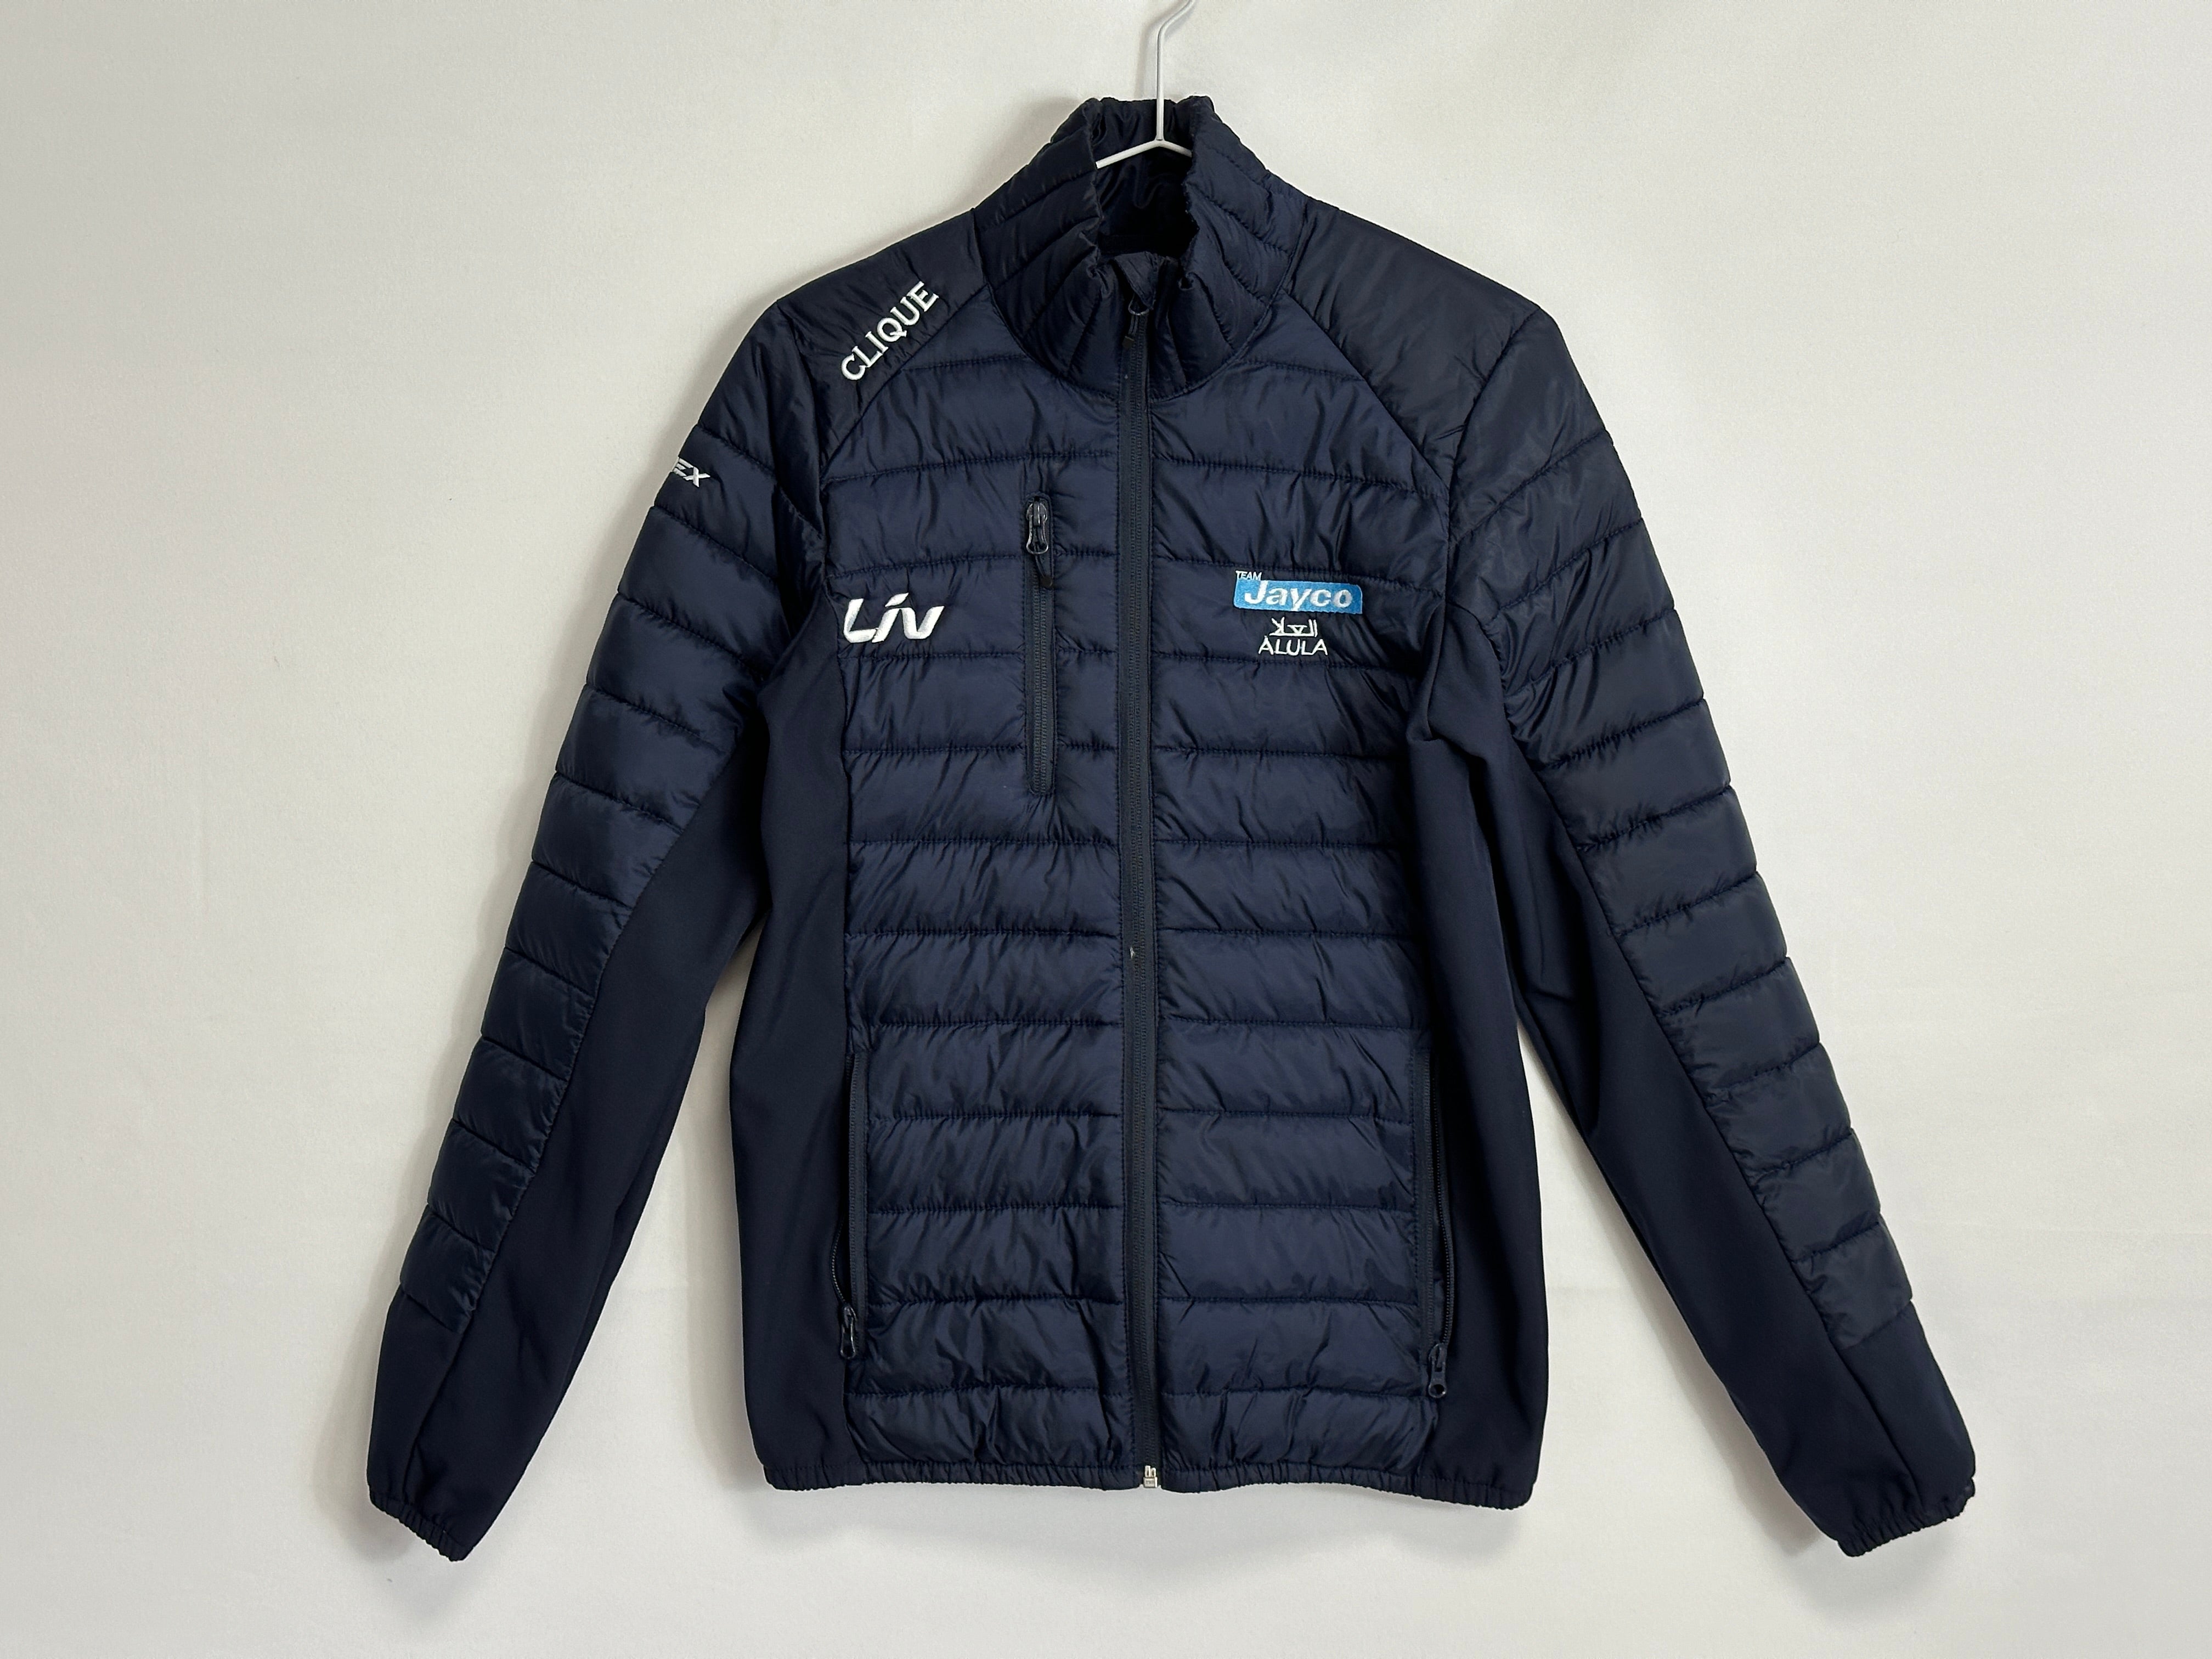 Team Jayco Alula - L/S Puffer Jacket by Clique